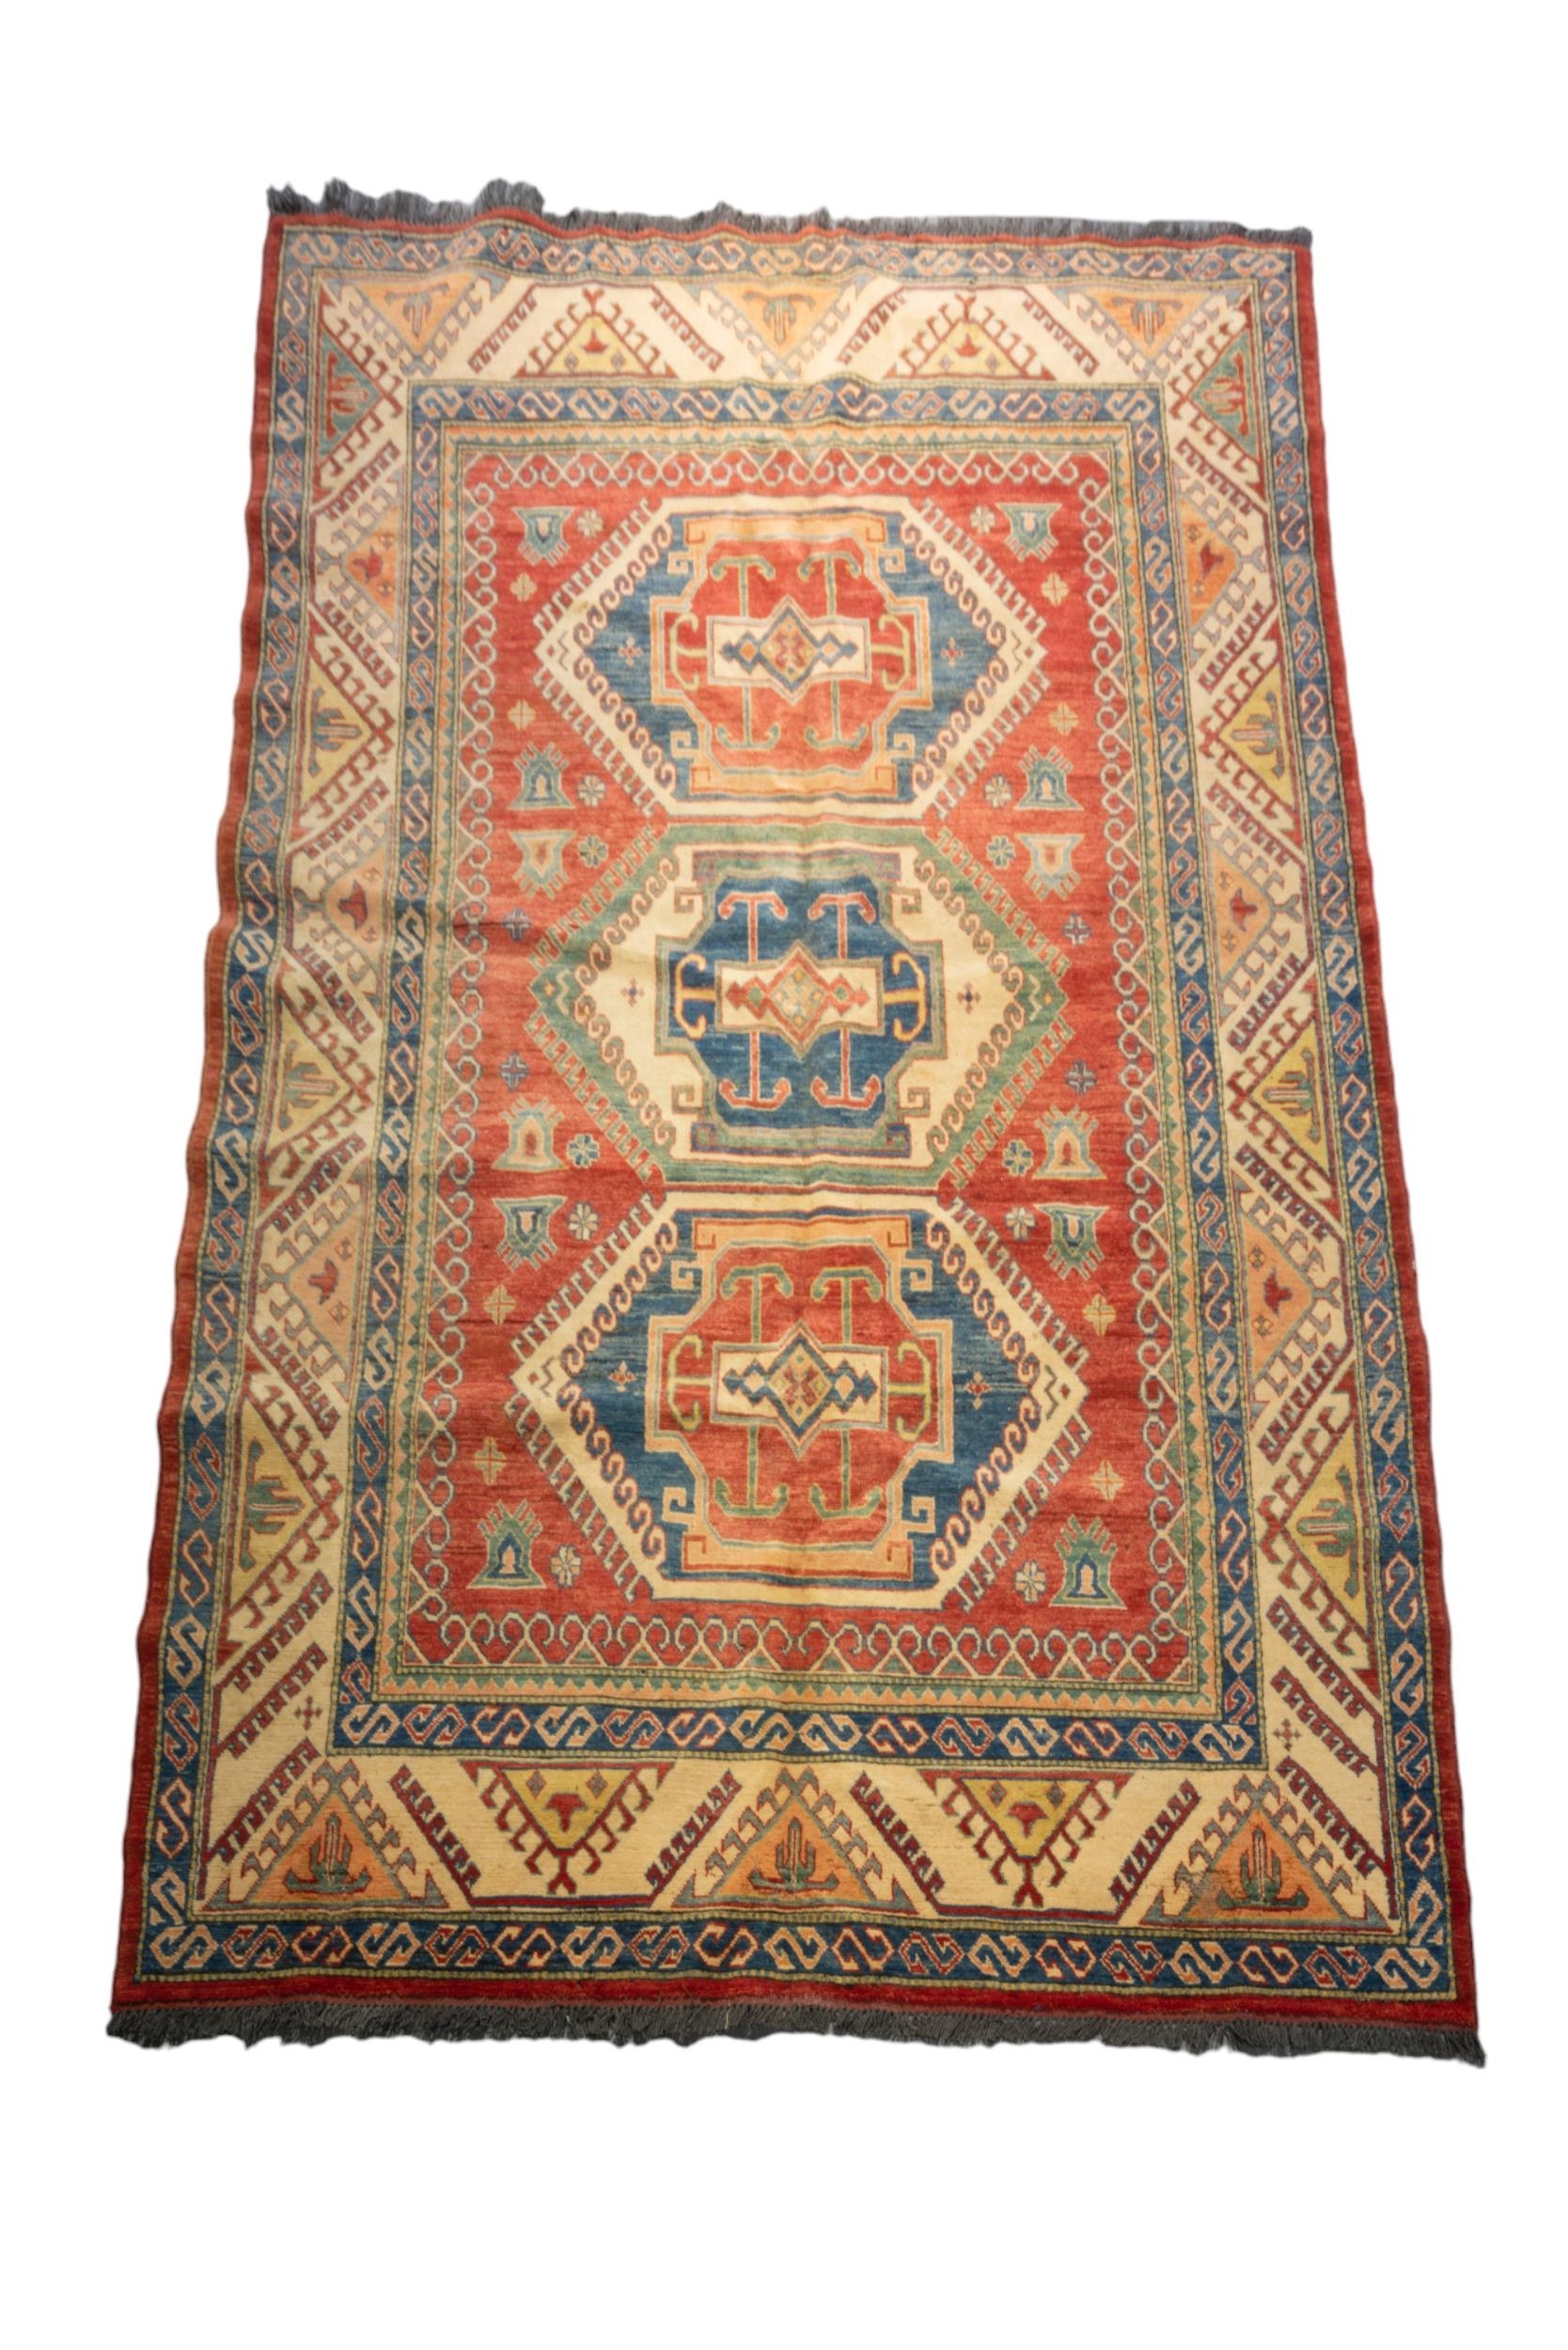 A HAND KNOTTED PERSIAN RUG, MID-LATE 20TH CENTURY, probably Kazhak, small area of damage 332 x 200 - Image 6 of 6